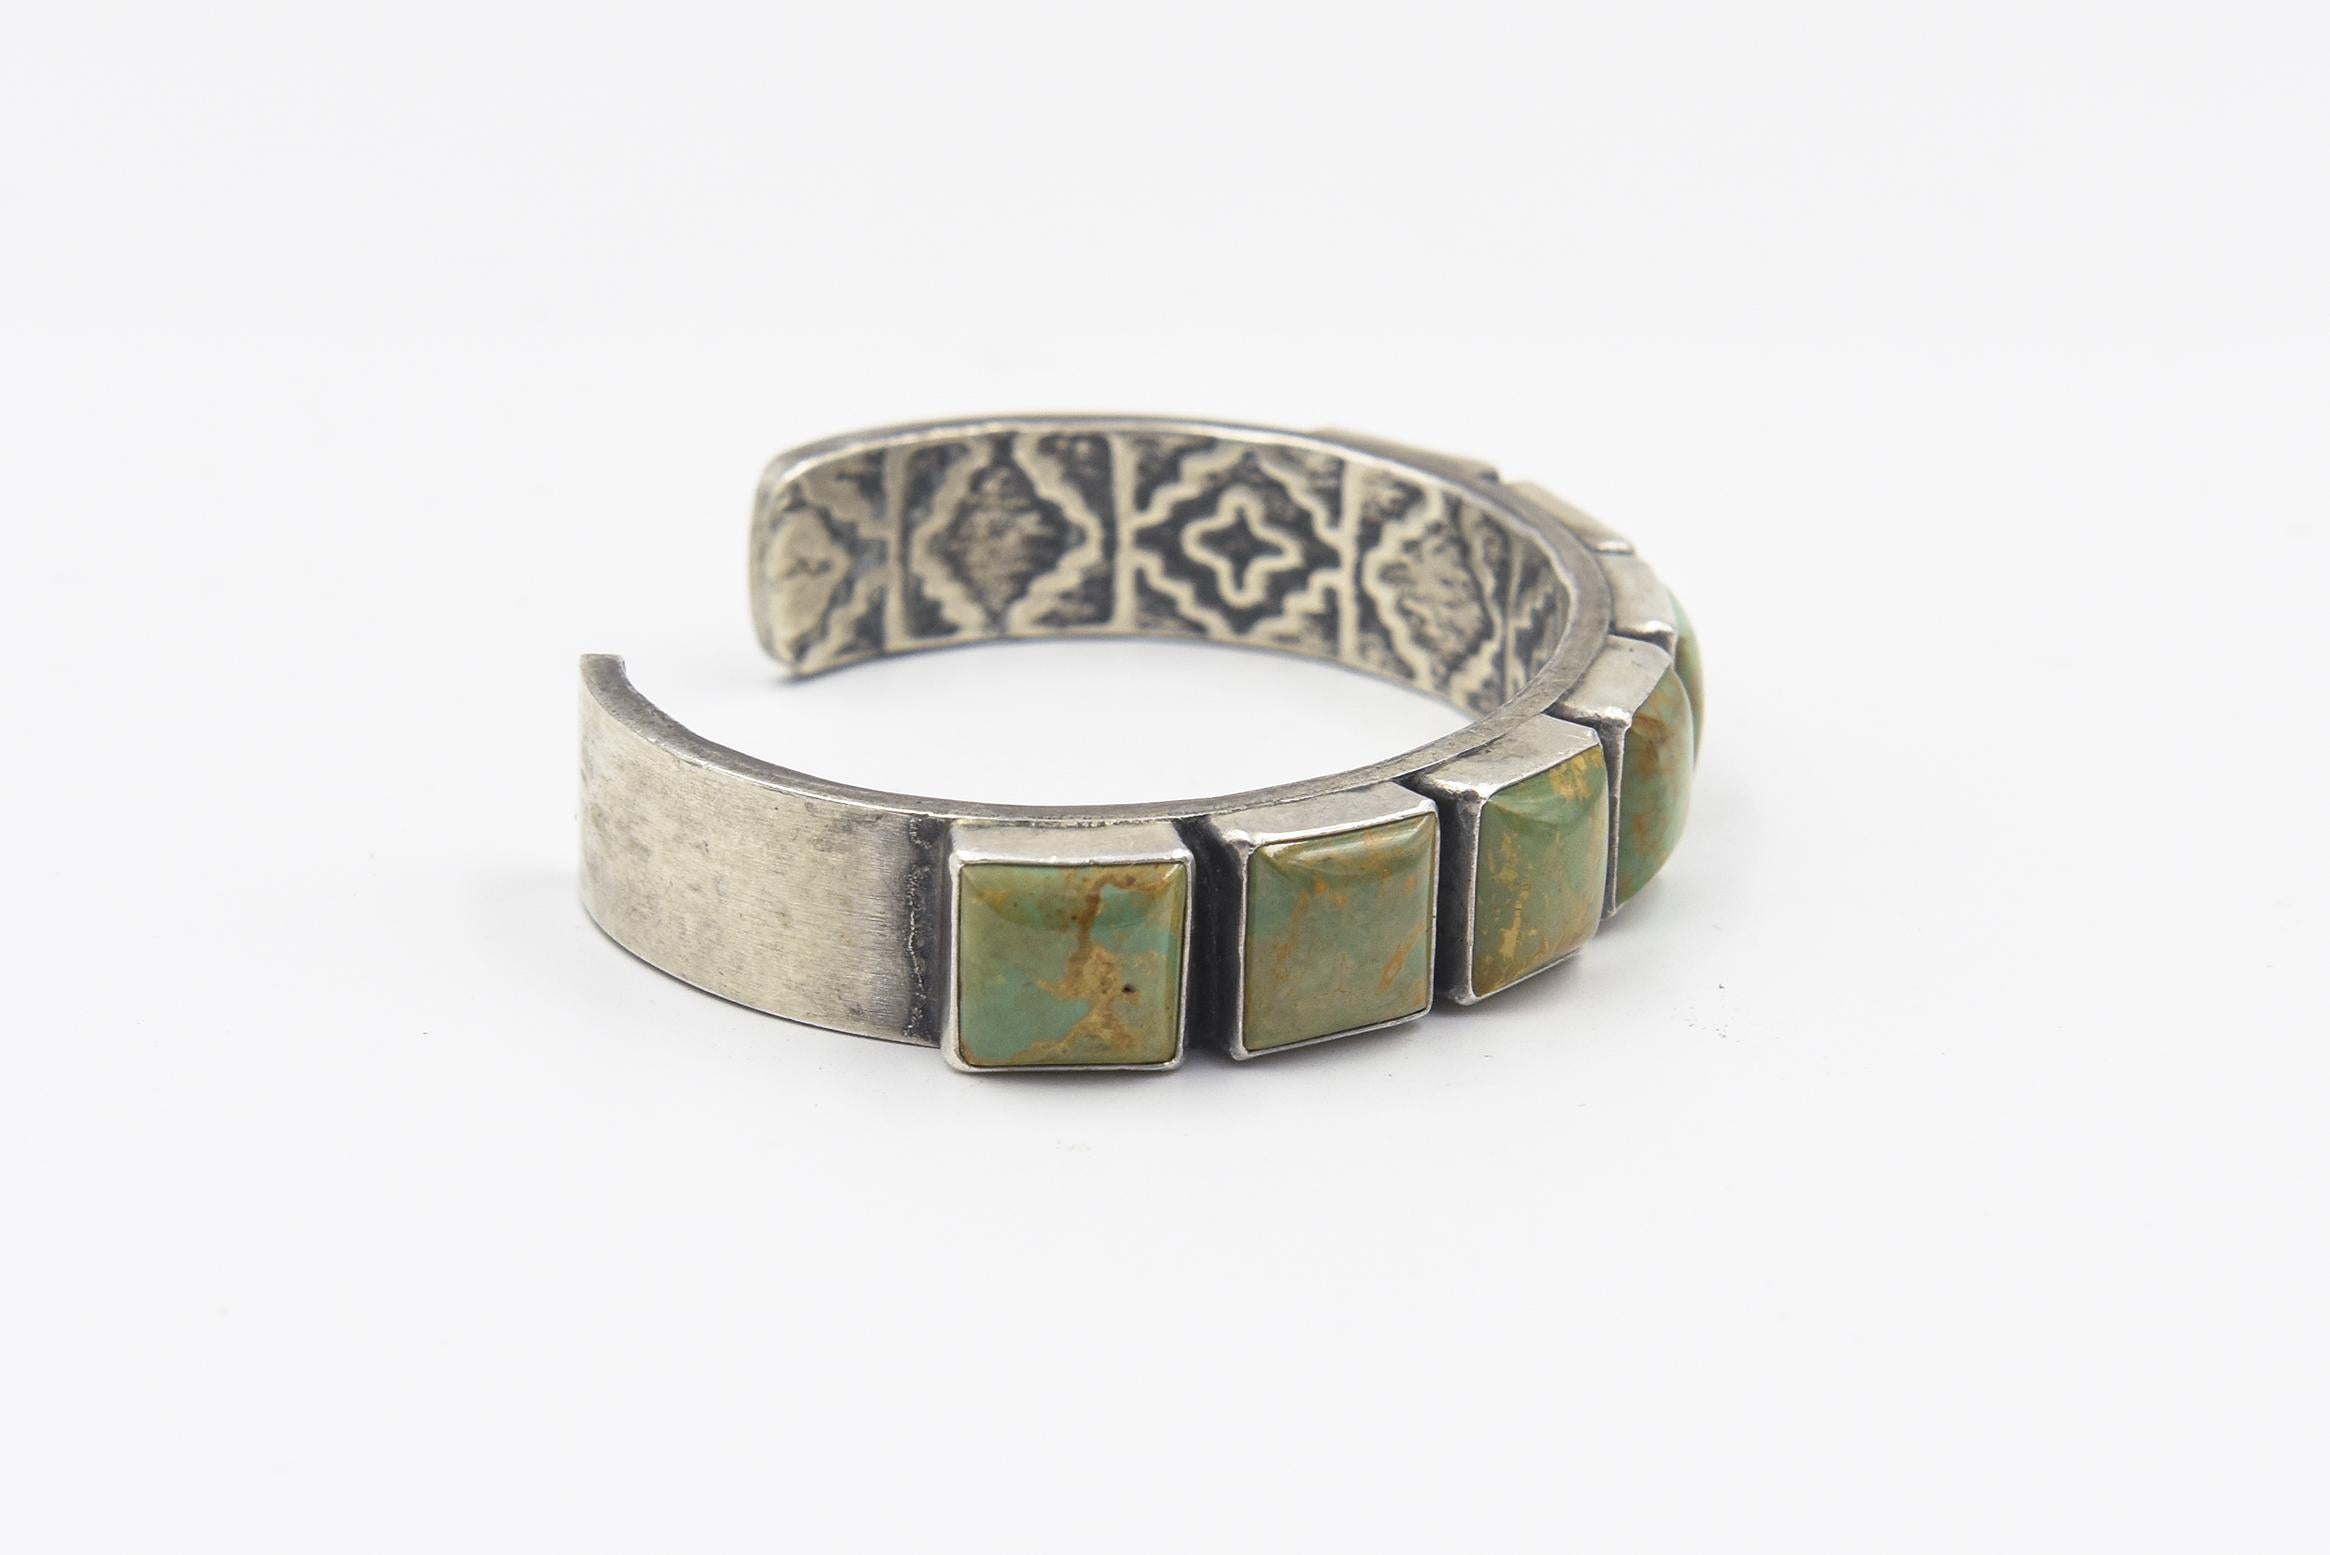 Native American Navajo Sterling Silver Turquoise Cuff Bracelet by Kirk Smith In Good Condition For Sale In Miami Beach, FL